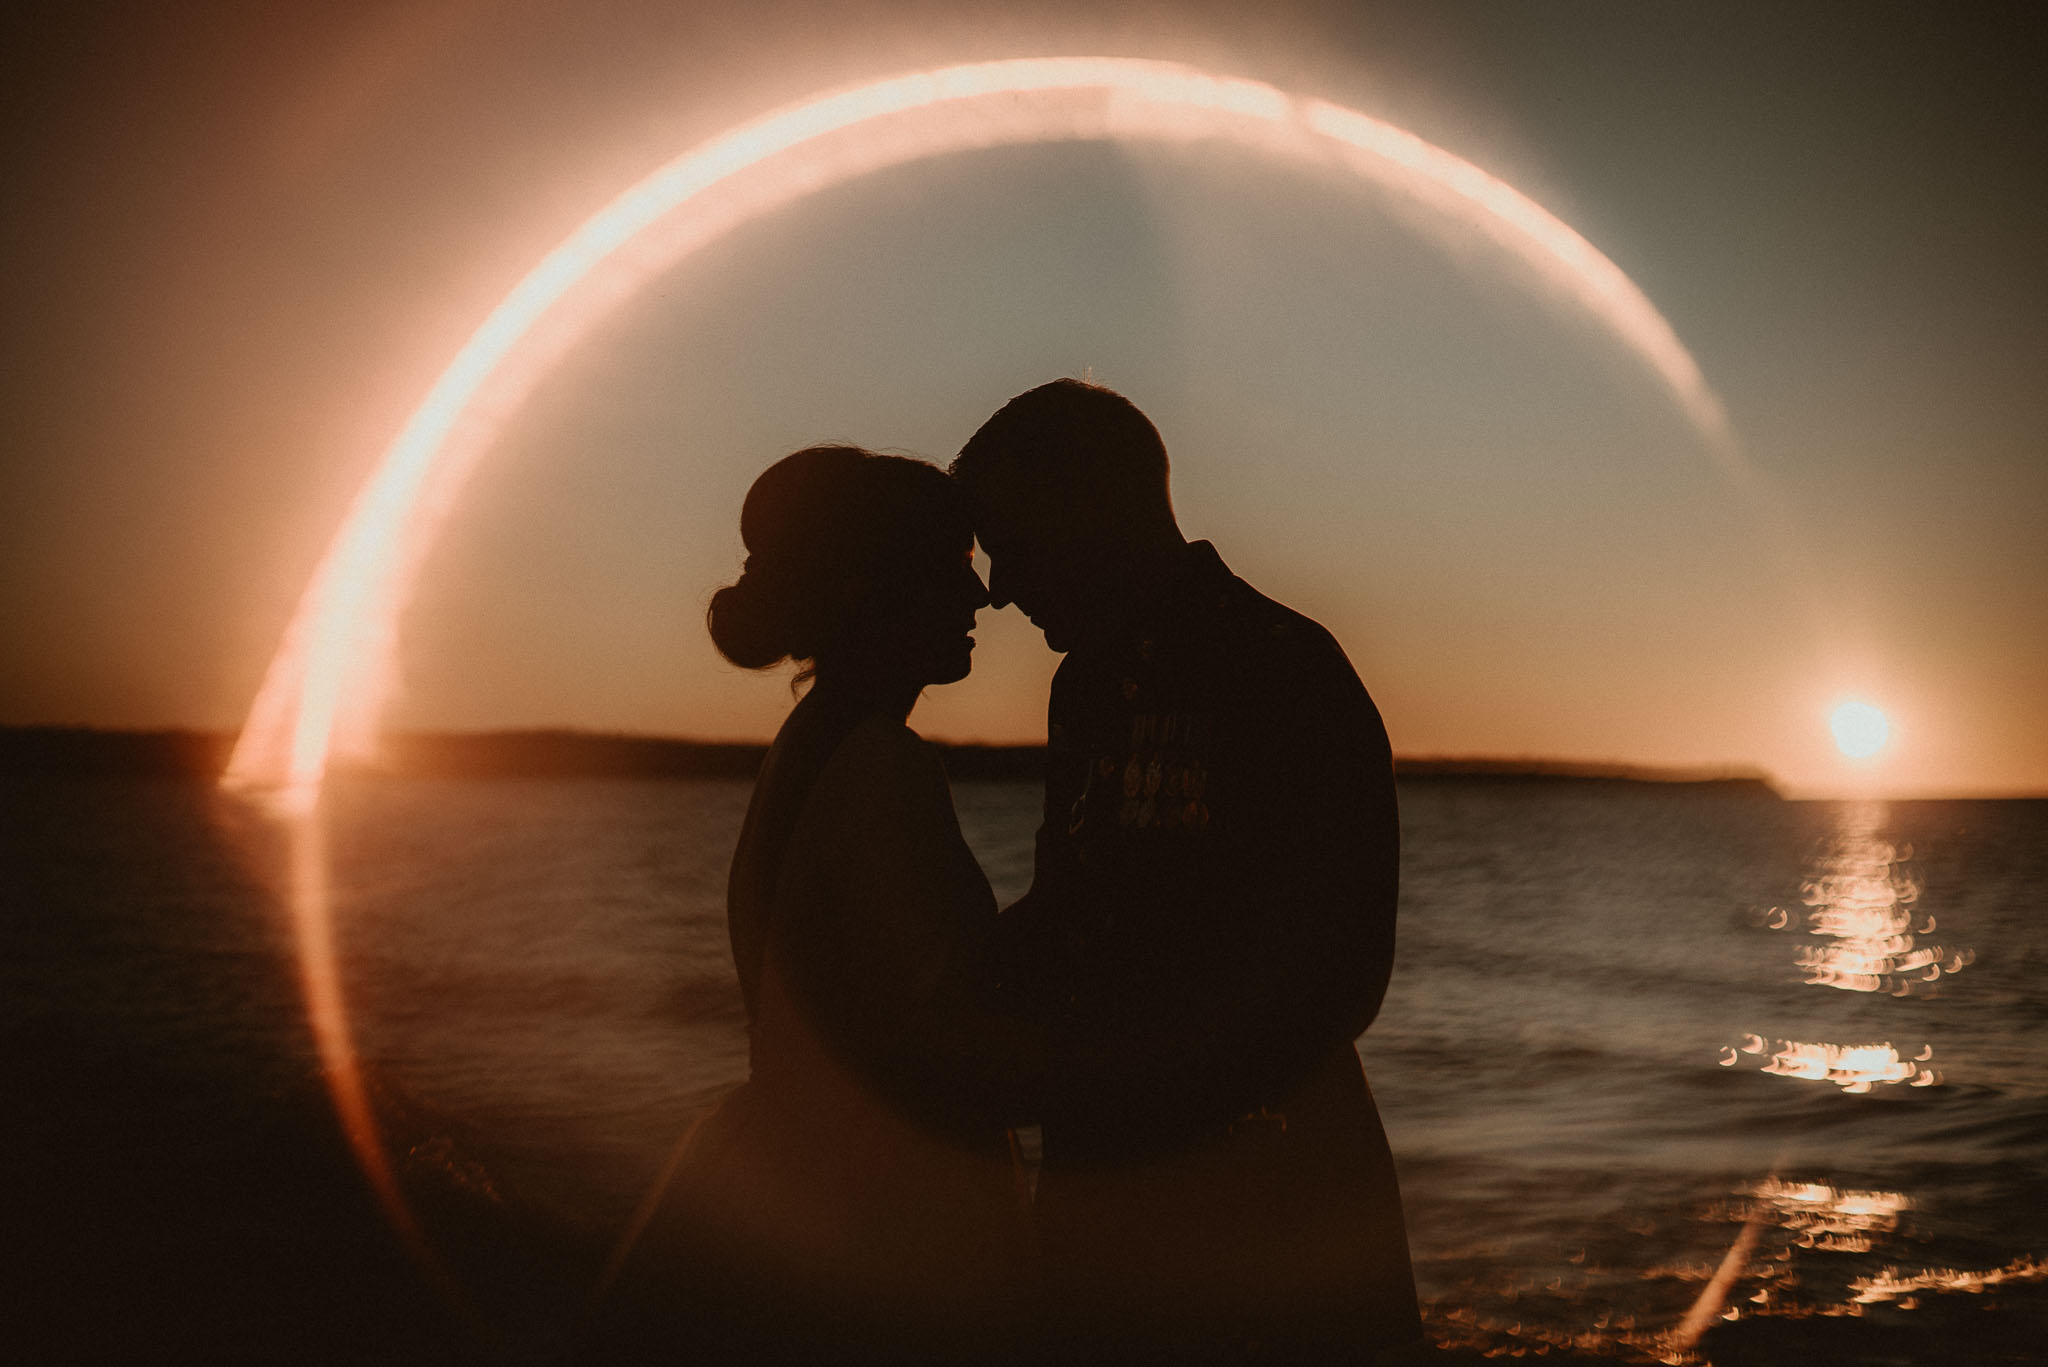 The bride and groom silhouetted inside sunset ring of fire.